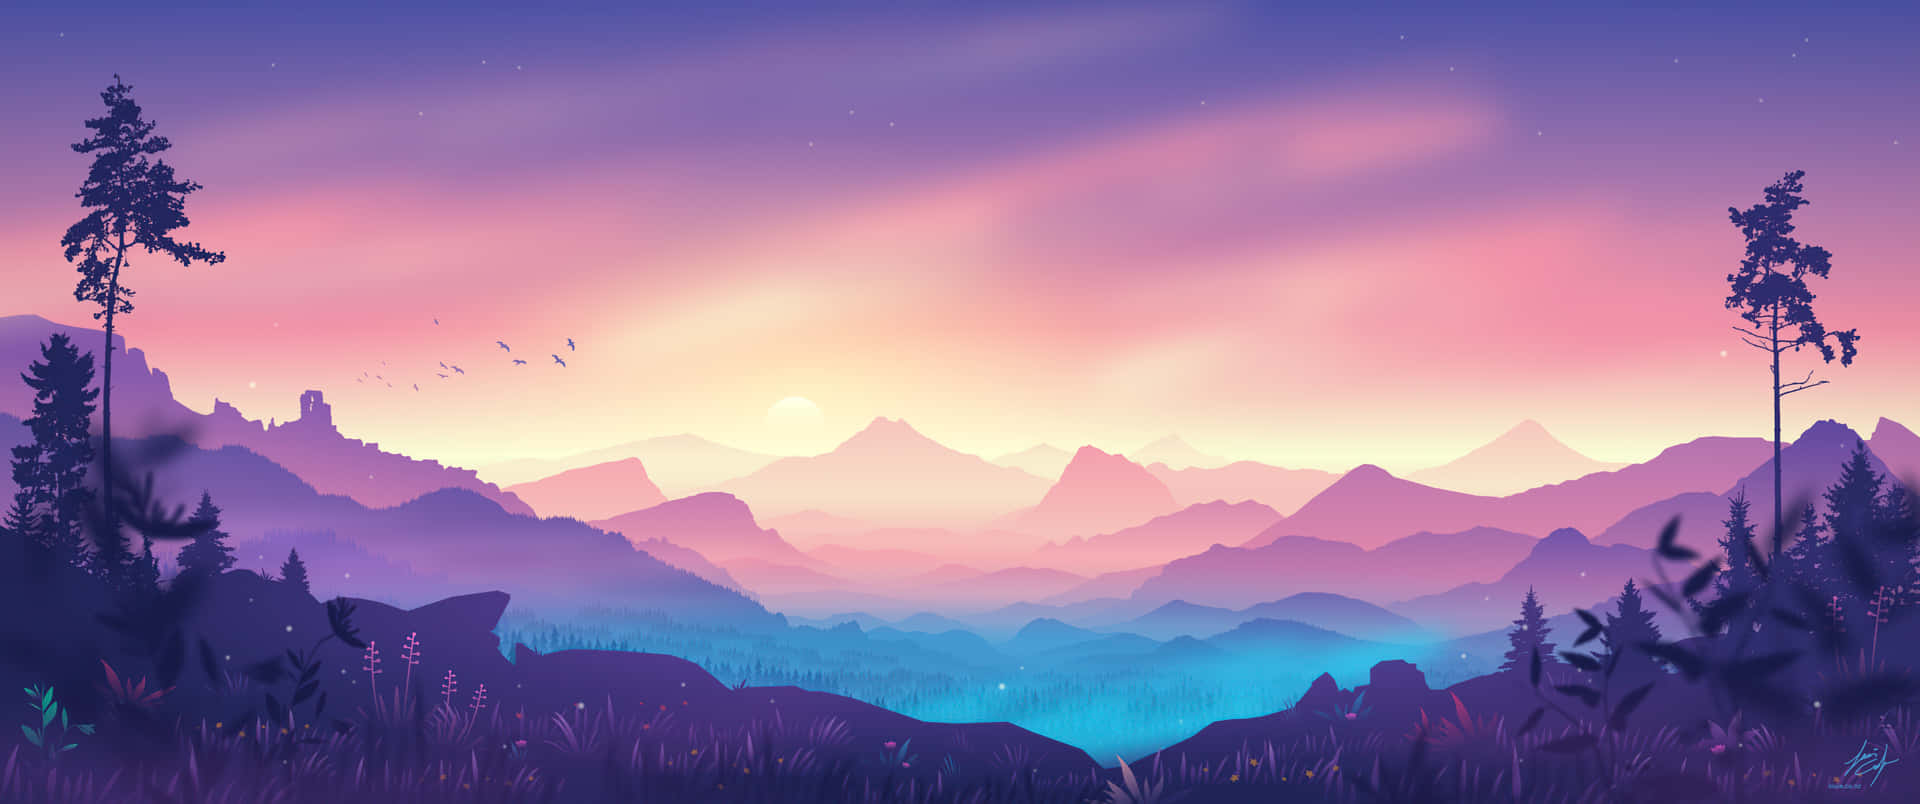 a painting of a mountain landscape with trees and flowers Wallpaper